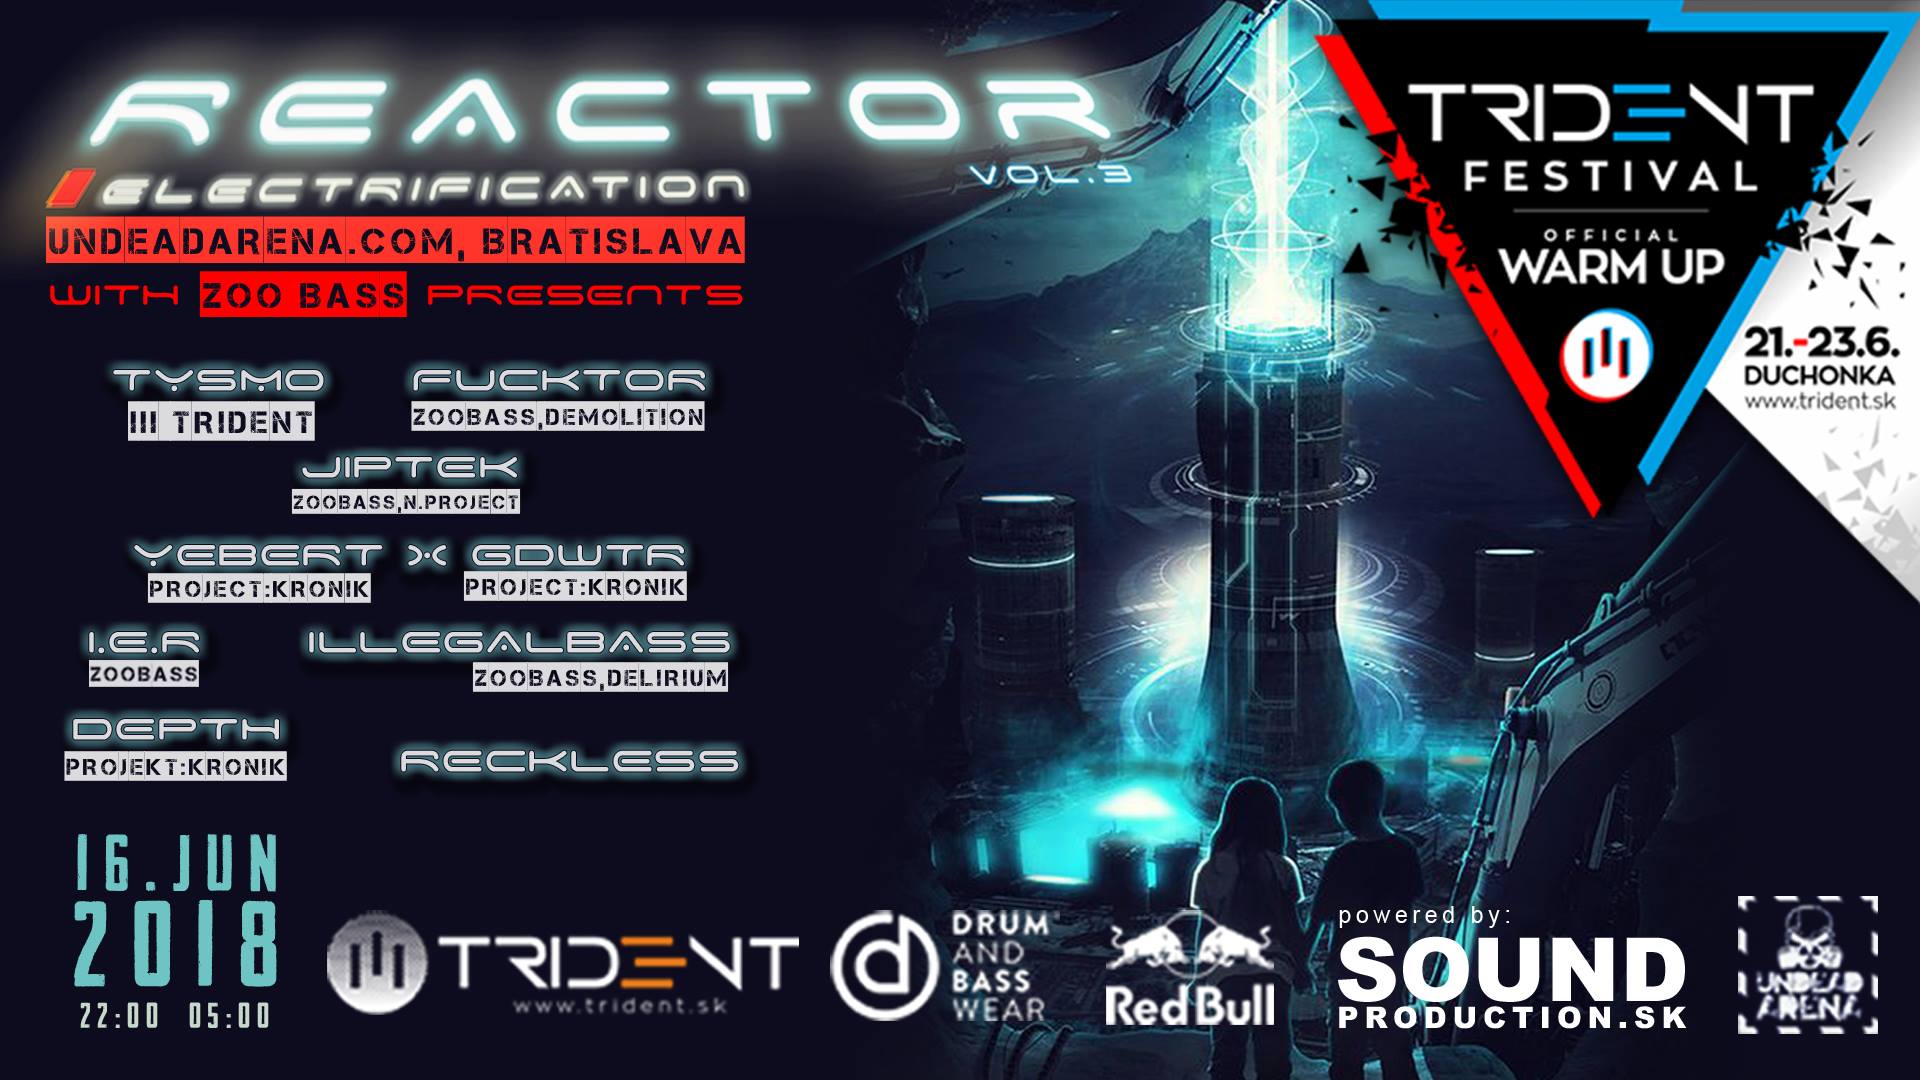 Reactor: Electrification – Trident festival official warm up